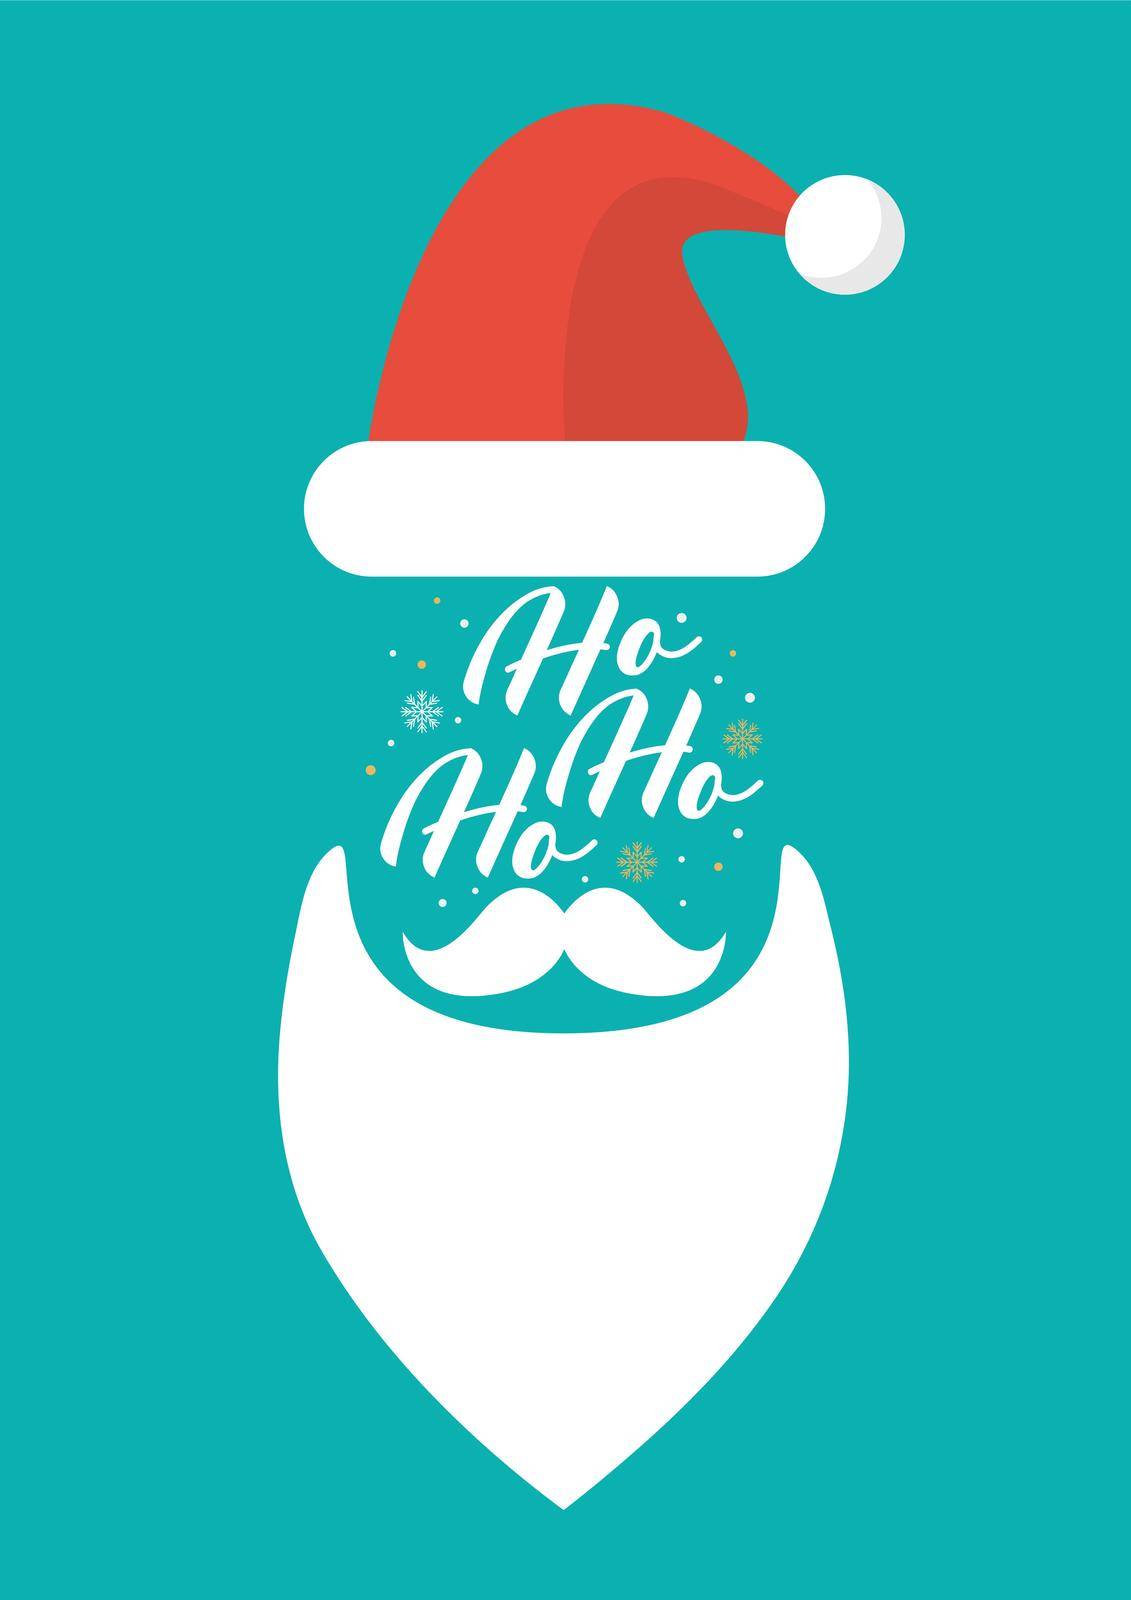 Hat Beard Mustache and Glasses of Santa with Ho-Ho-Ho text. Greeting card Vector illustration